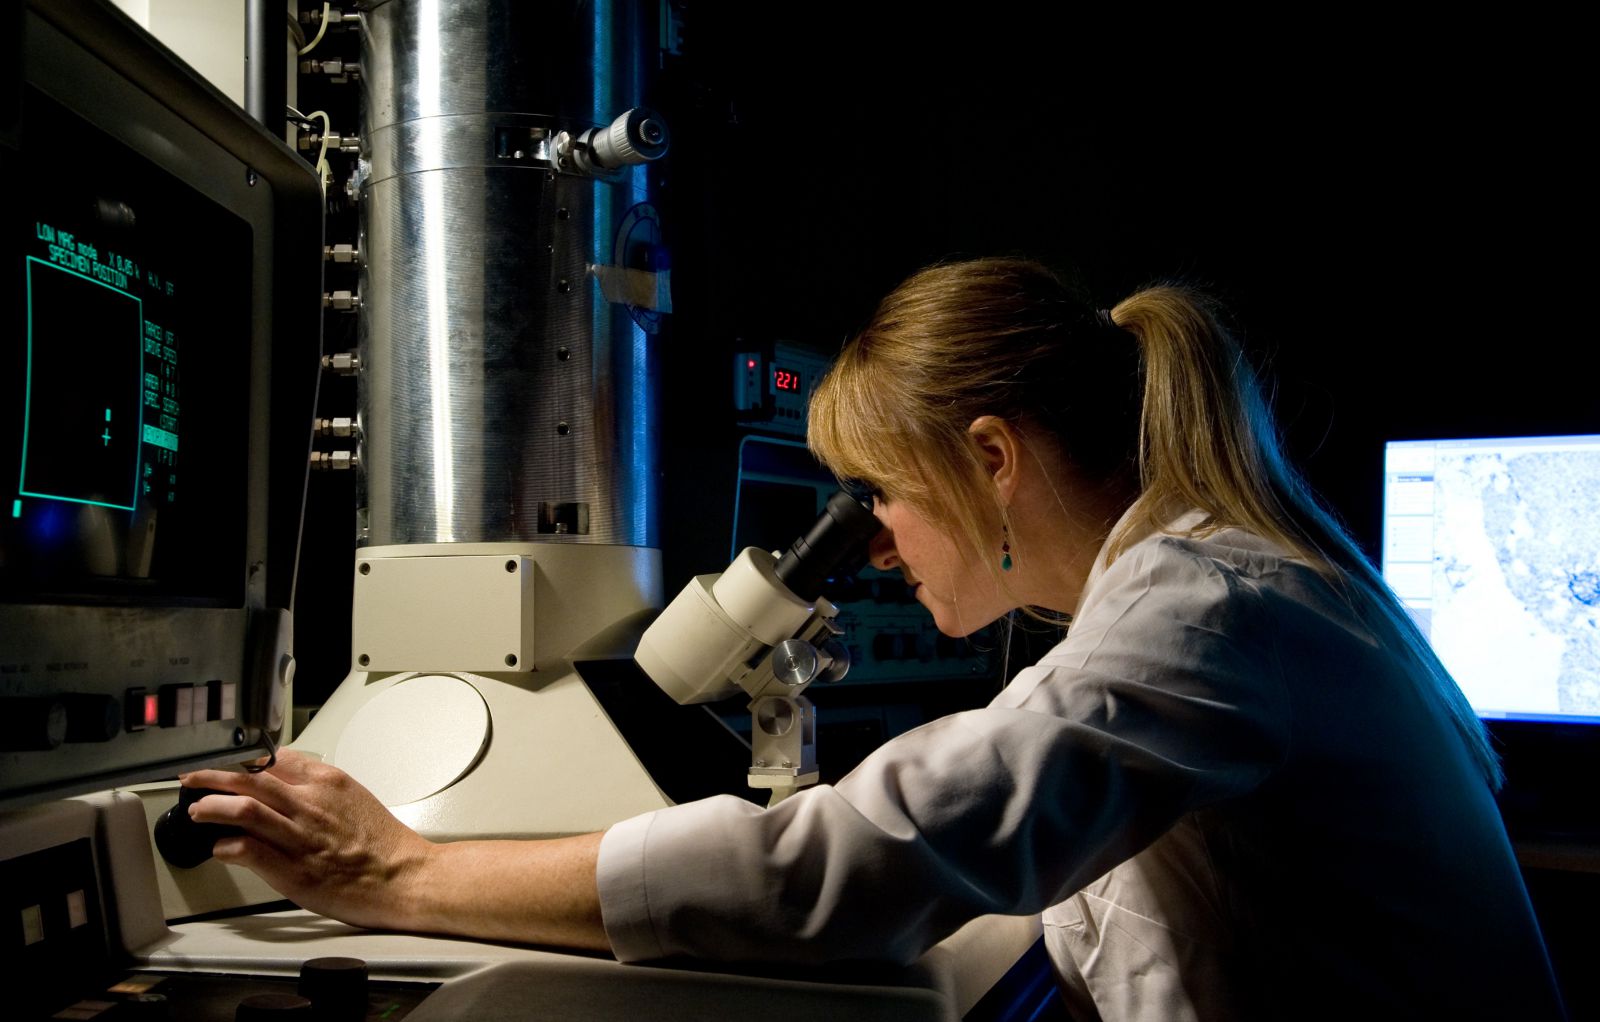 PhD student looks through a microscope in a science lab at the Ƶ